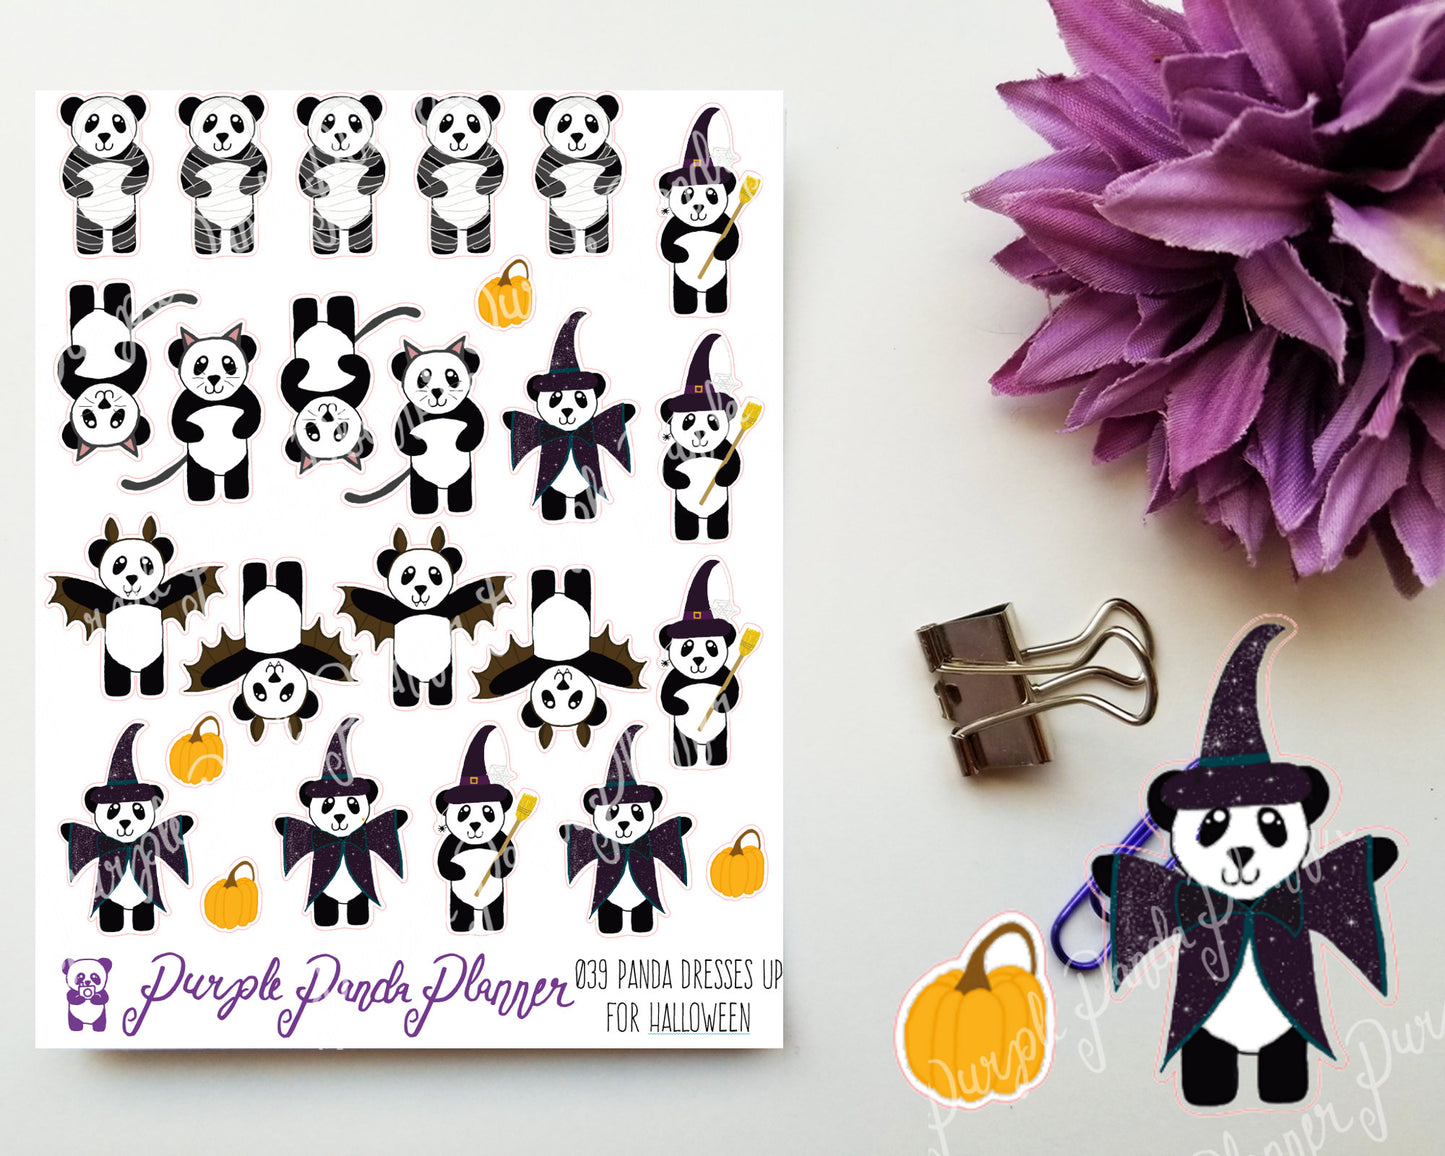 Panda Dresses up for Halloween 039 Planner or Bullet Journal Stickers for Functional Planning